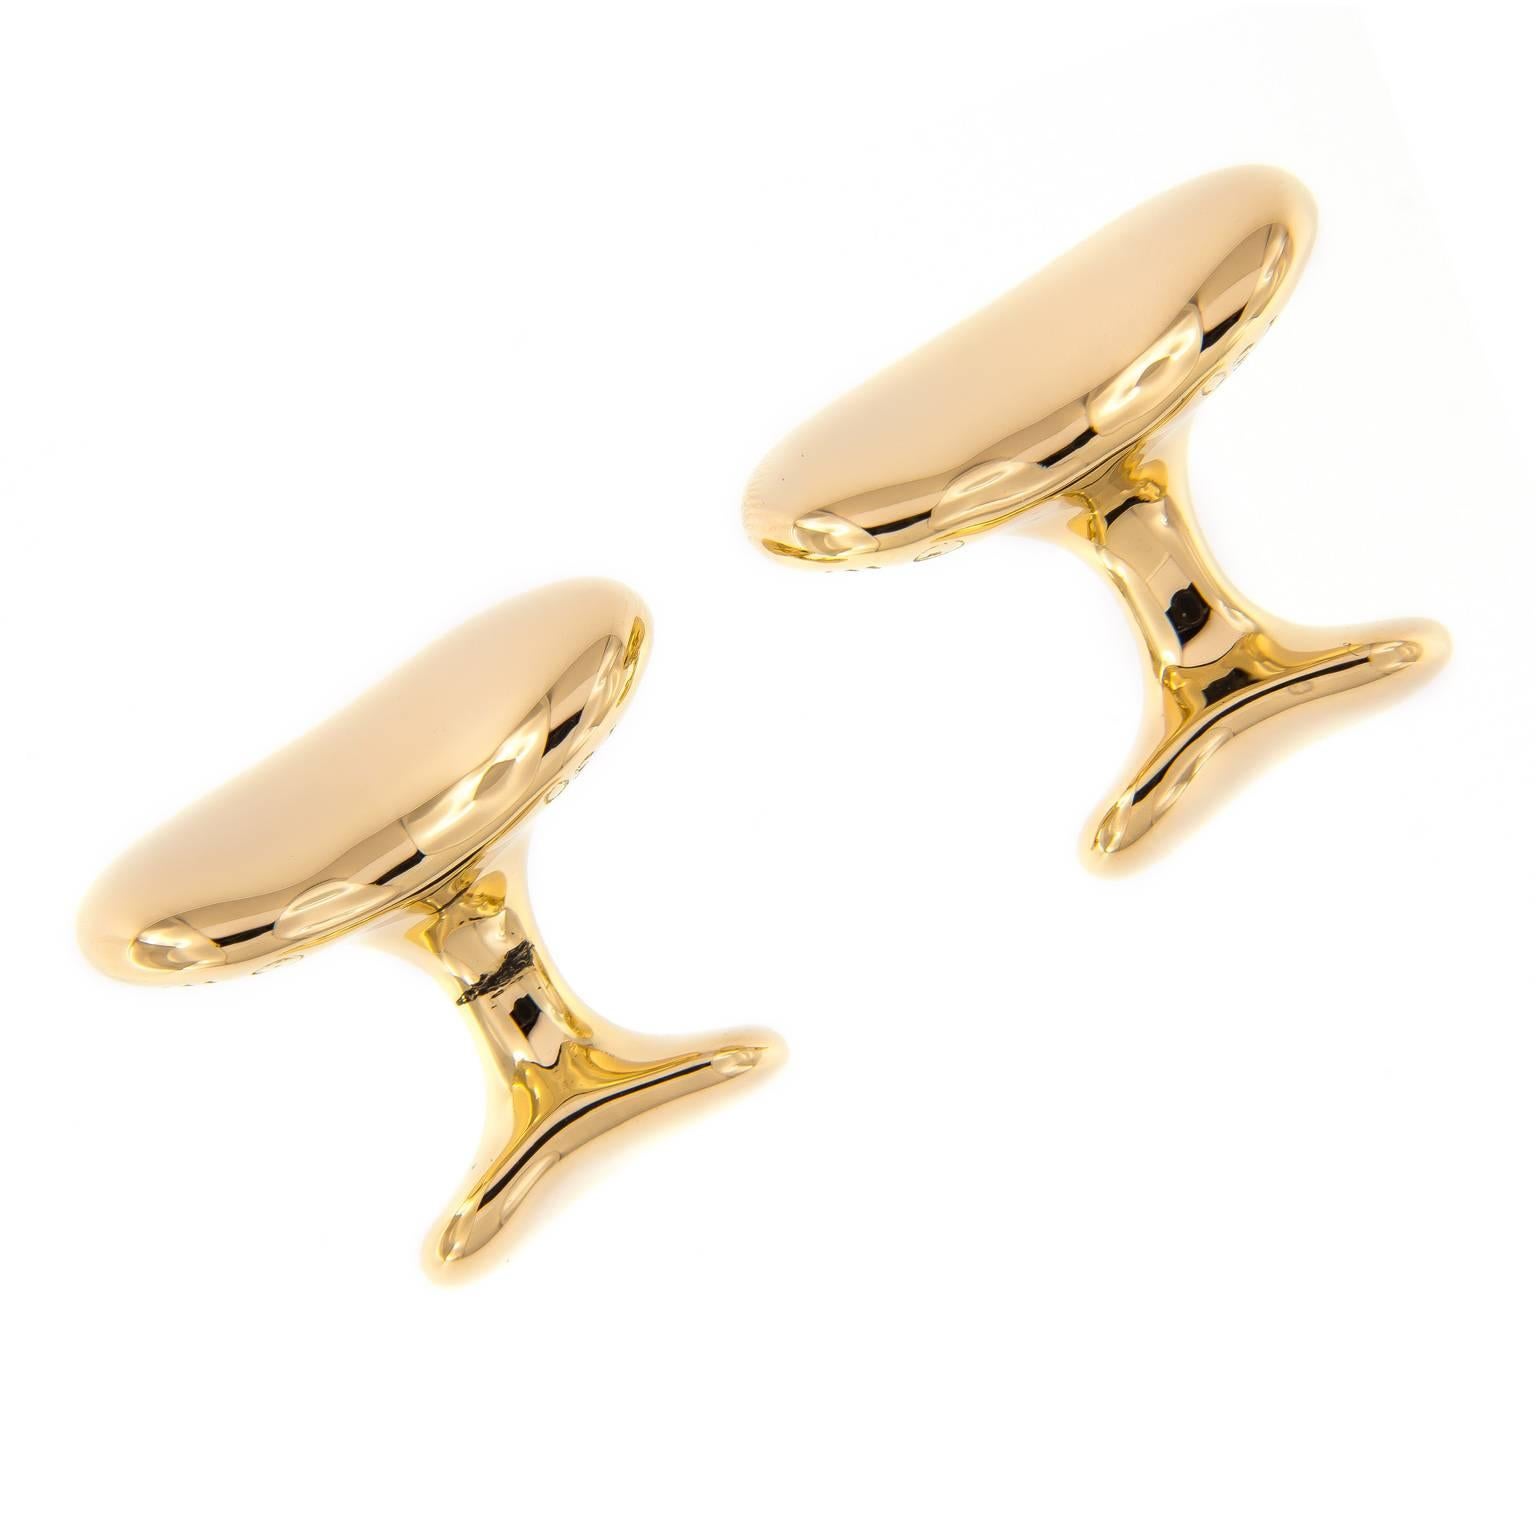 The iconic bean design by Elsa Peretti represents
the origin of all things. Cufflinks are heavy weight and highly polished 18k yellow gold. Weight 20.6 grams.

Marked: Tiffany & Co. and Elsa Peretti